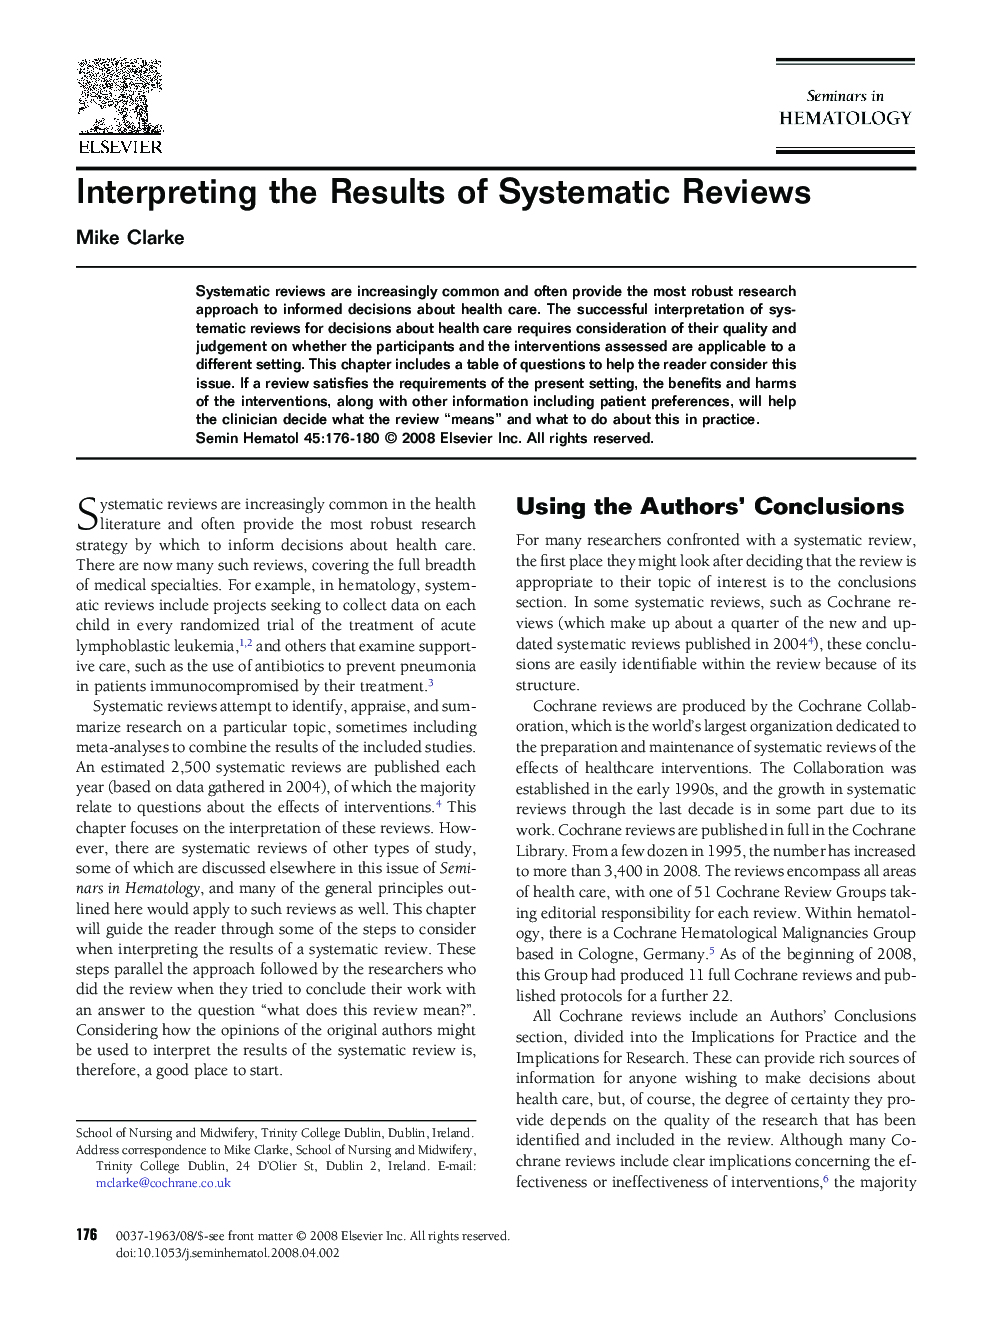 Interpreting the Results of Systematic Reviews